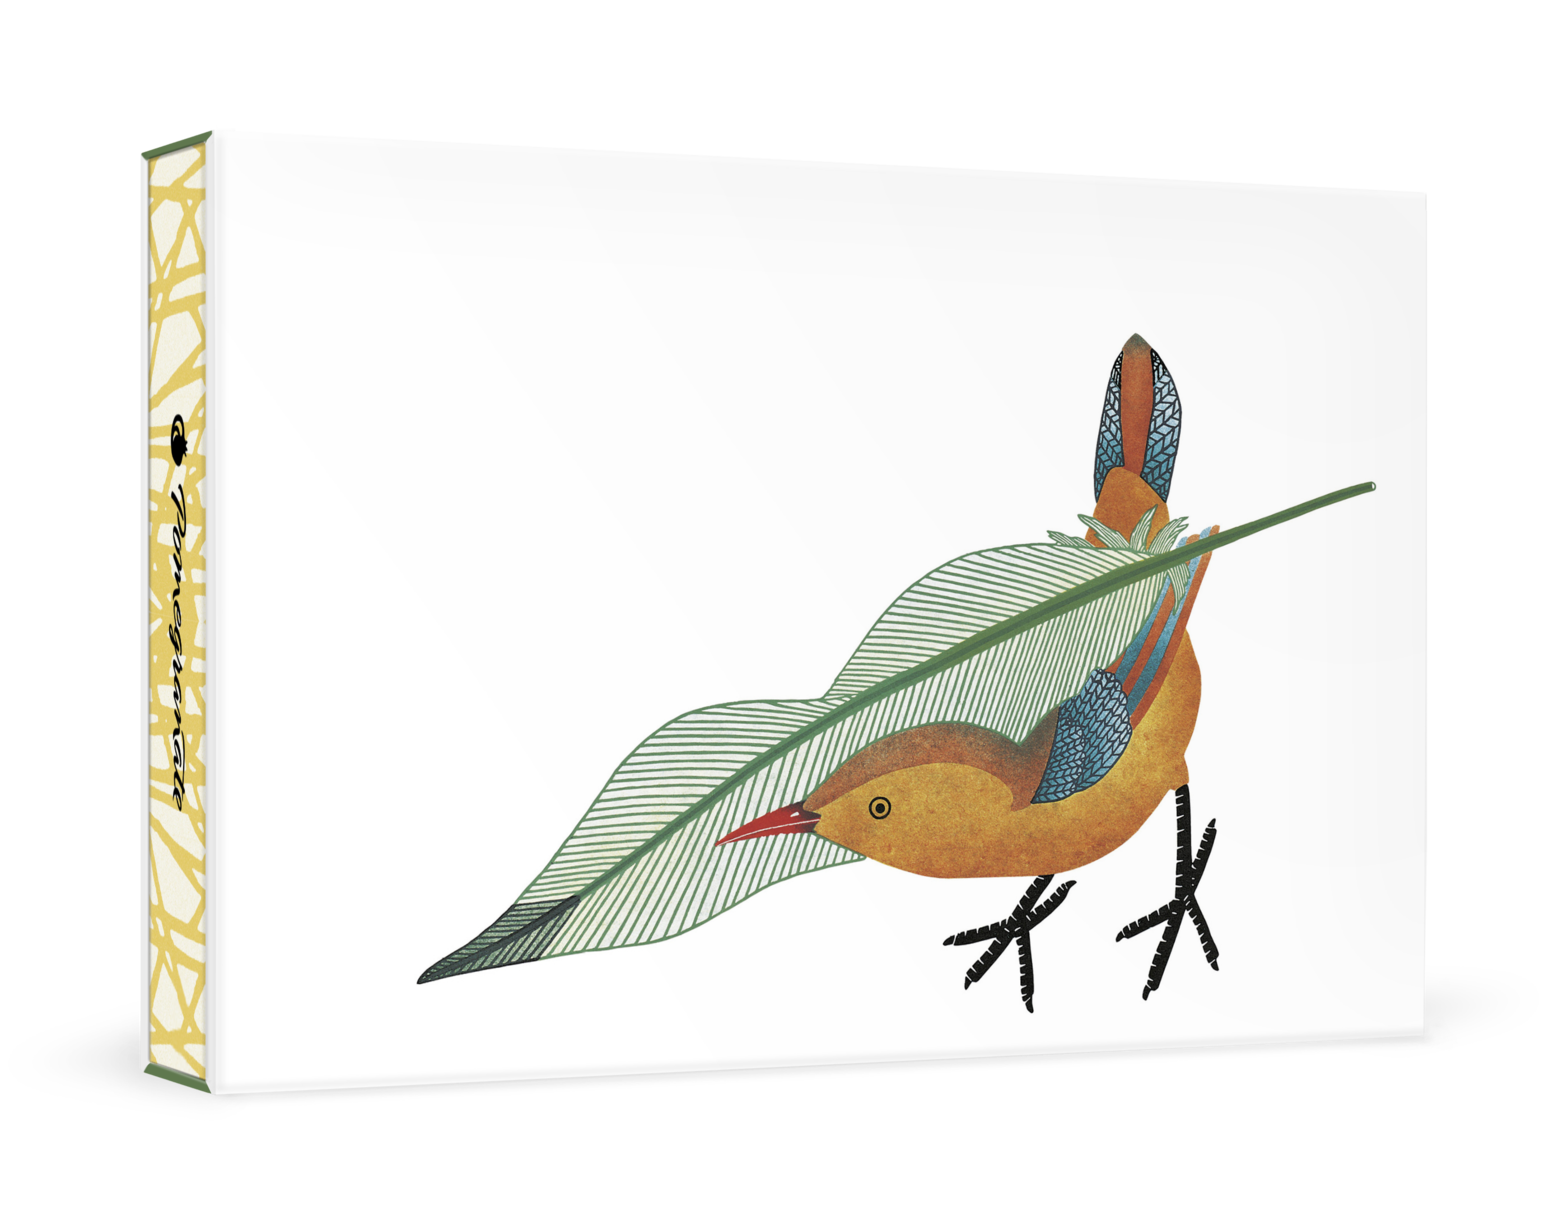 Qavavau Manumie Feathering The Nest - Boxed Note Cards    